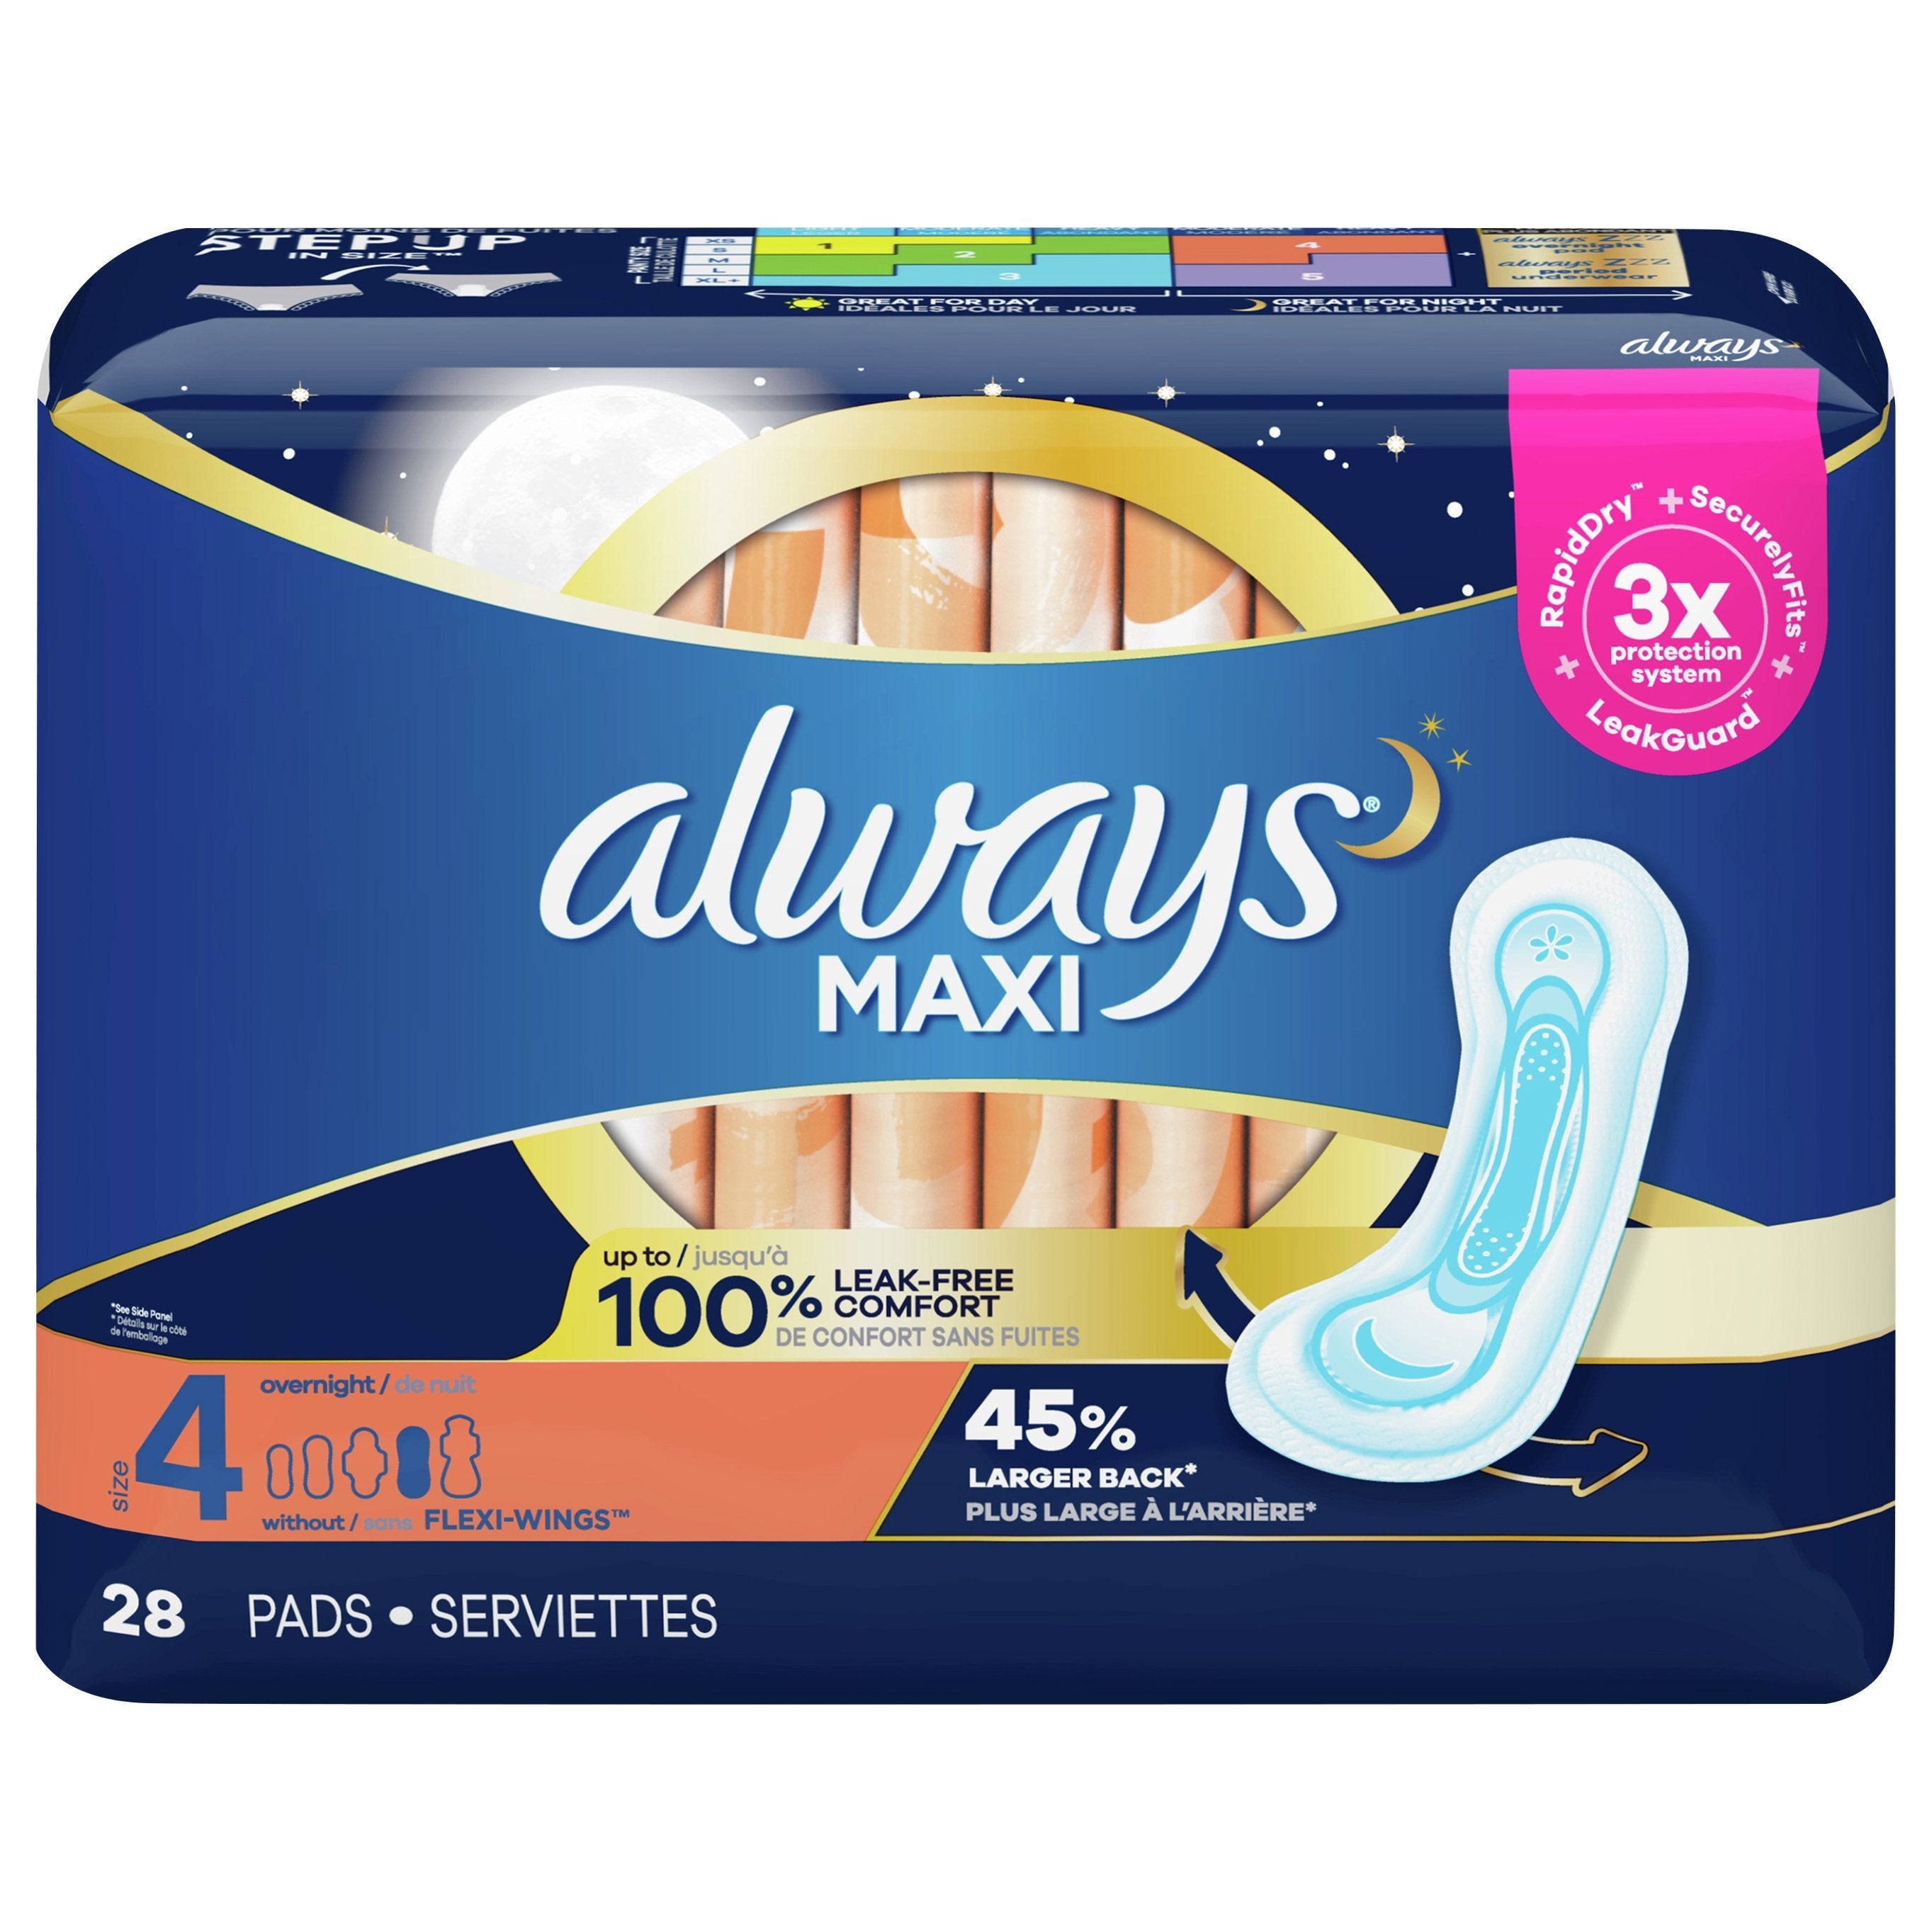 Always ZZZ Overnight Pads Size 6 With Wings 10 Count